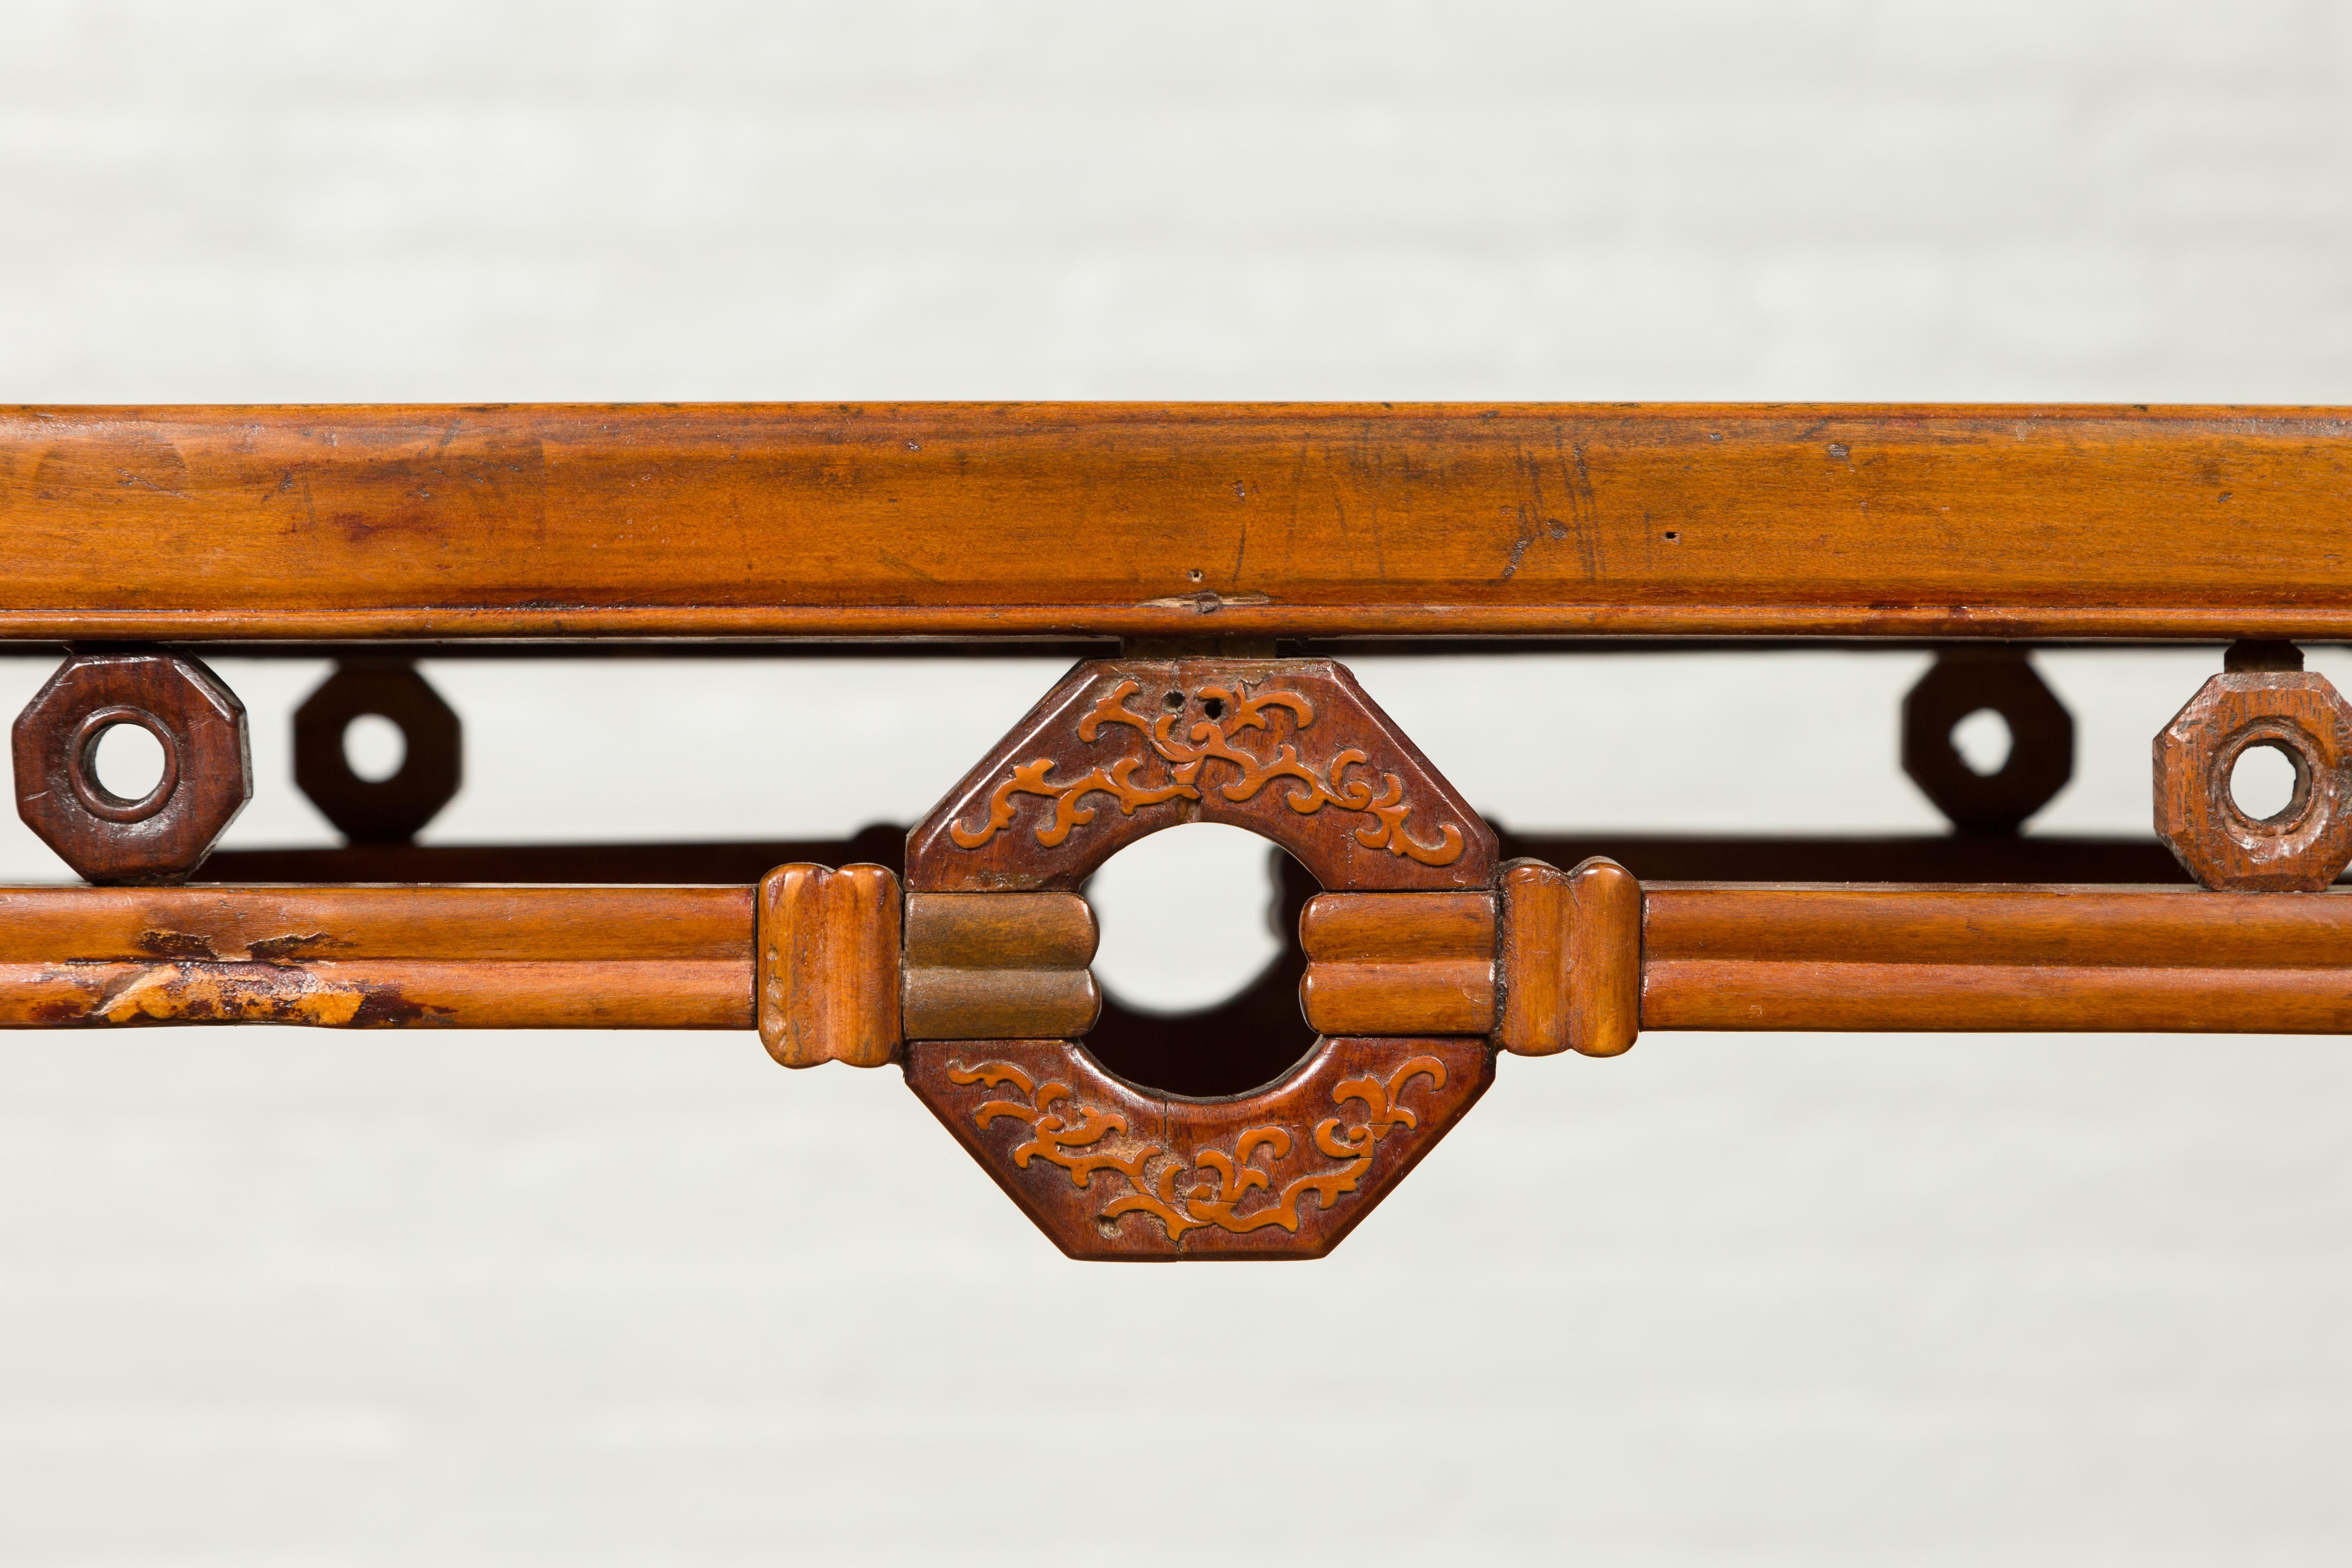 Carved Chinese Console Table with Humpback Apron, Coin Patterns and Horse hoof Legs